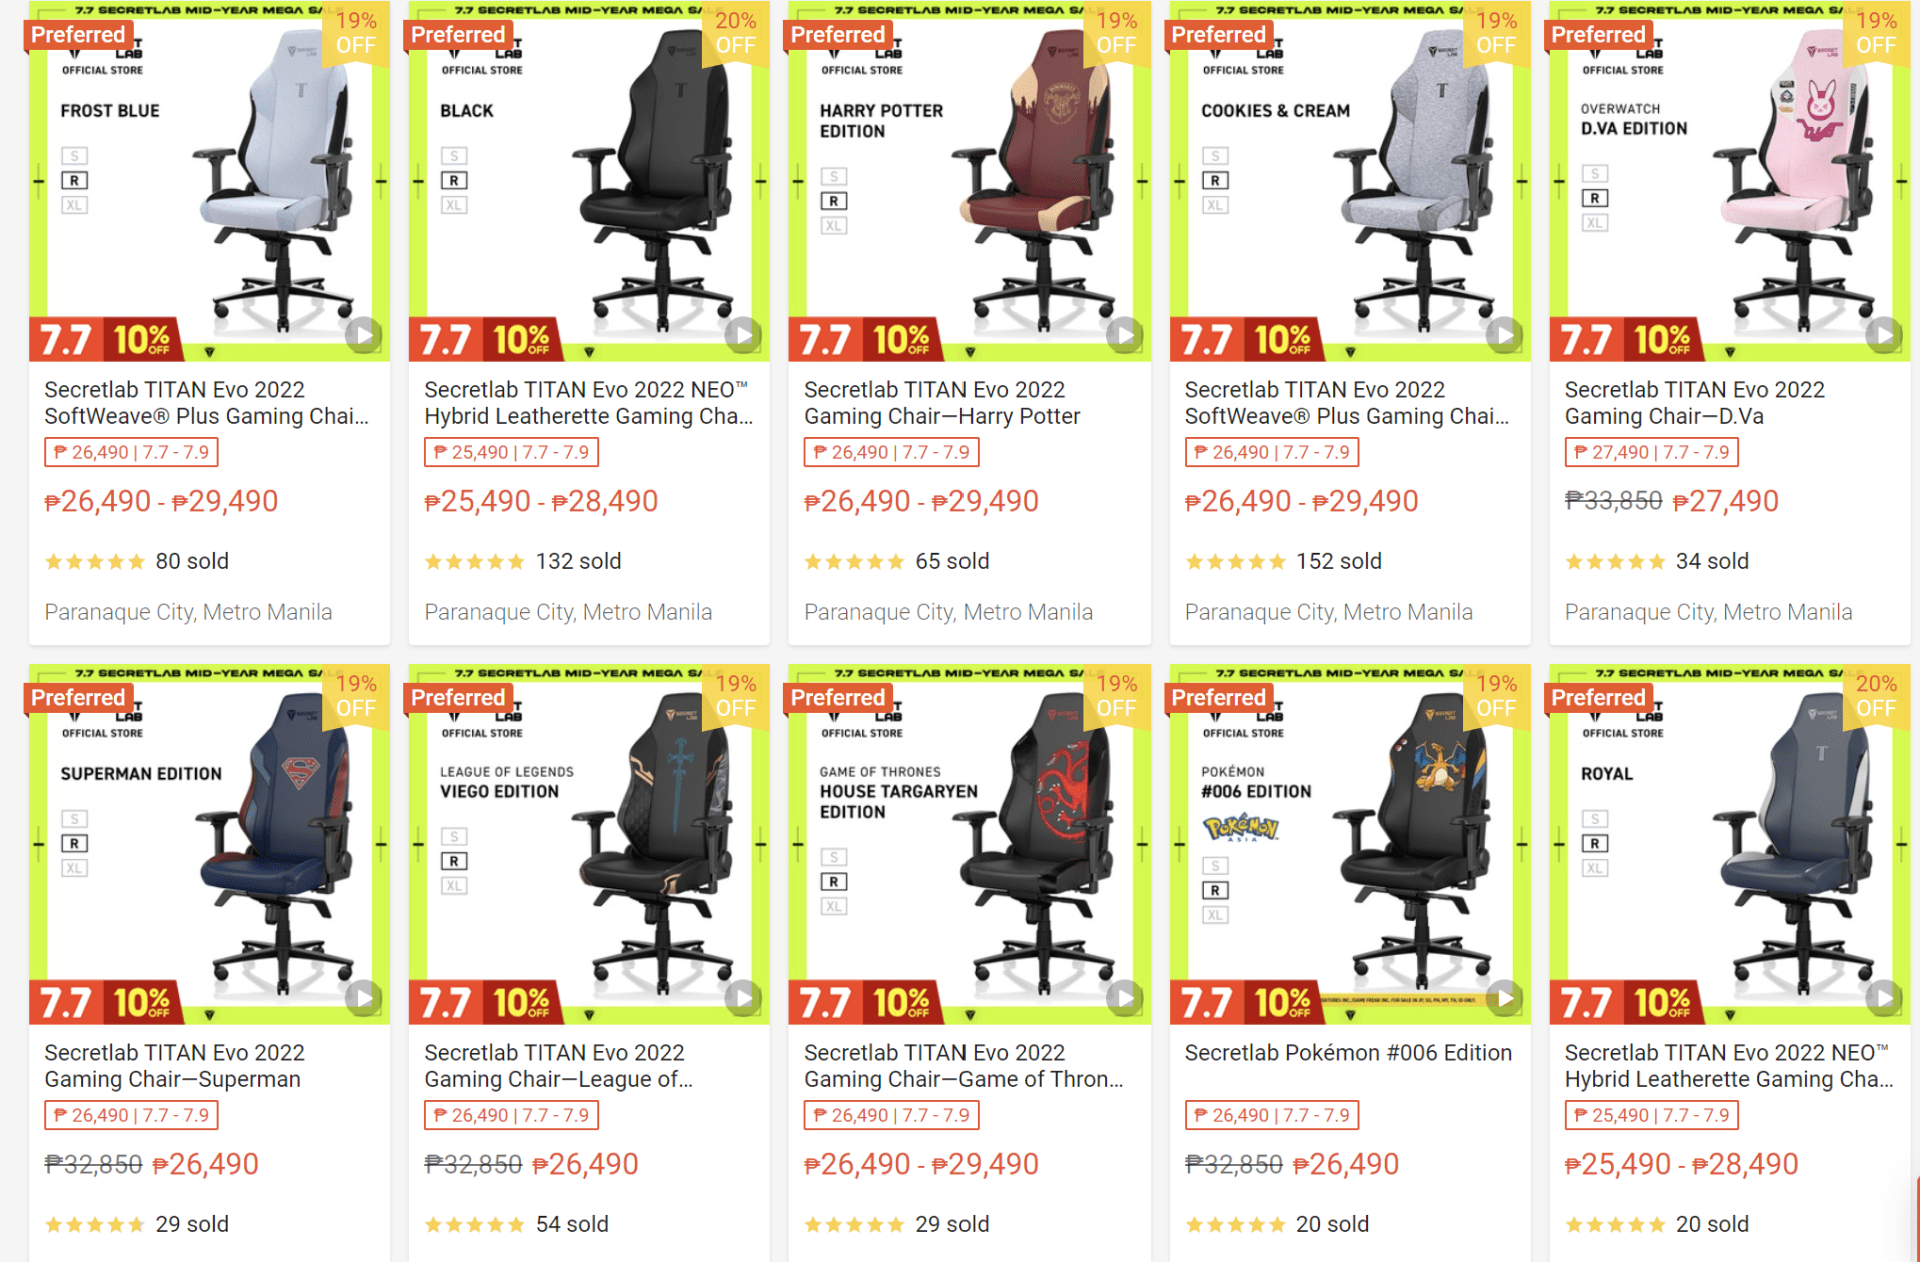 Get up to 26 Off on these Secretlab Gaming Chairs this 7.7 to 7.11